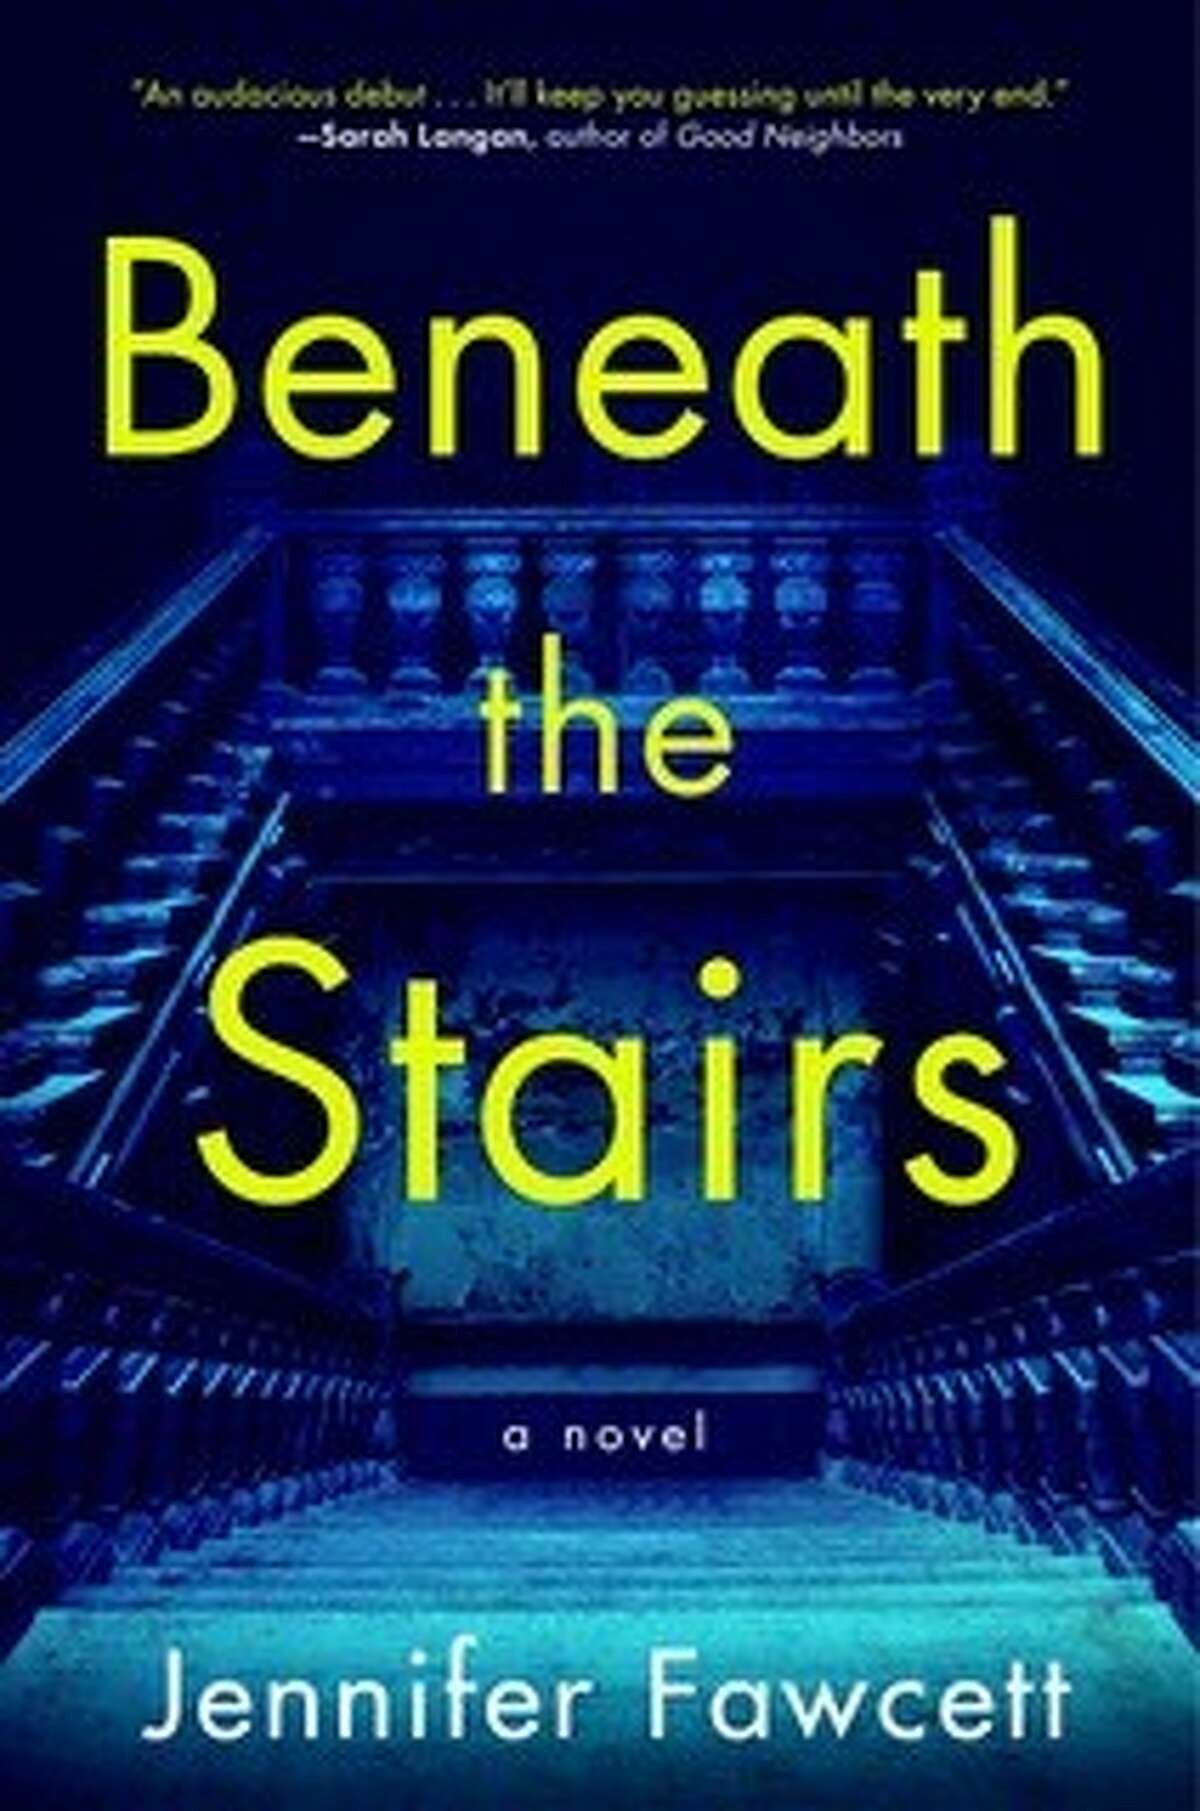 Jennifer Fawcett, who teaches English at Skimore College, recently came out with her first novel, "Beneath the Stairs."